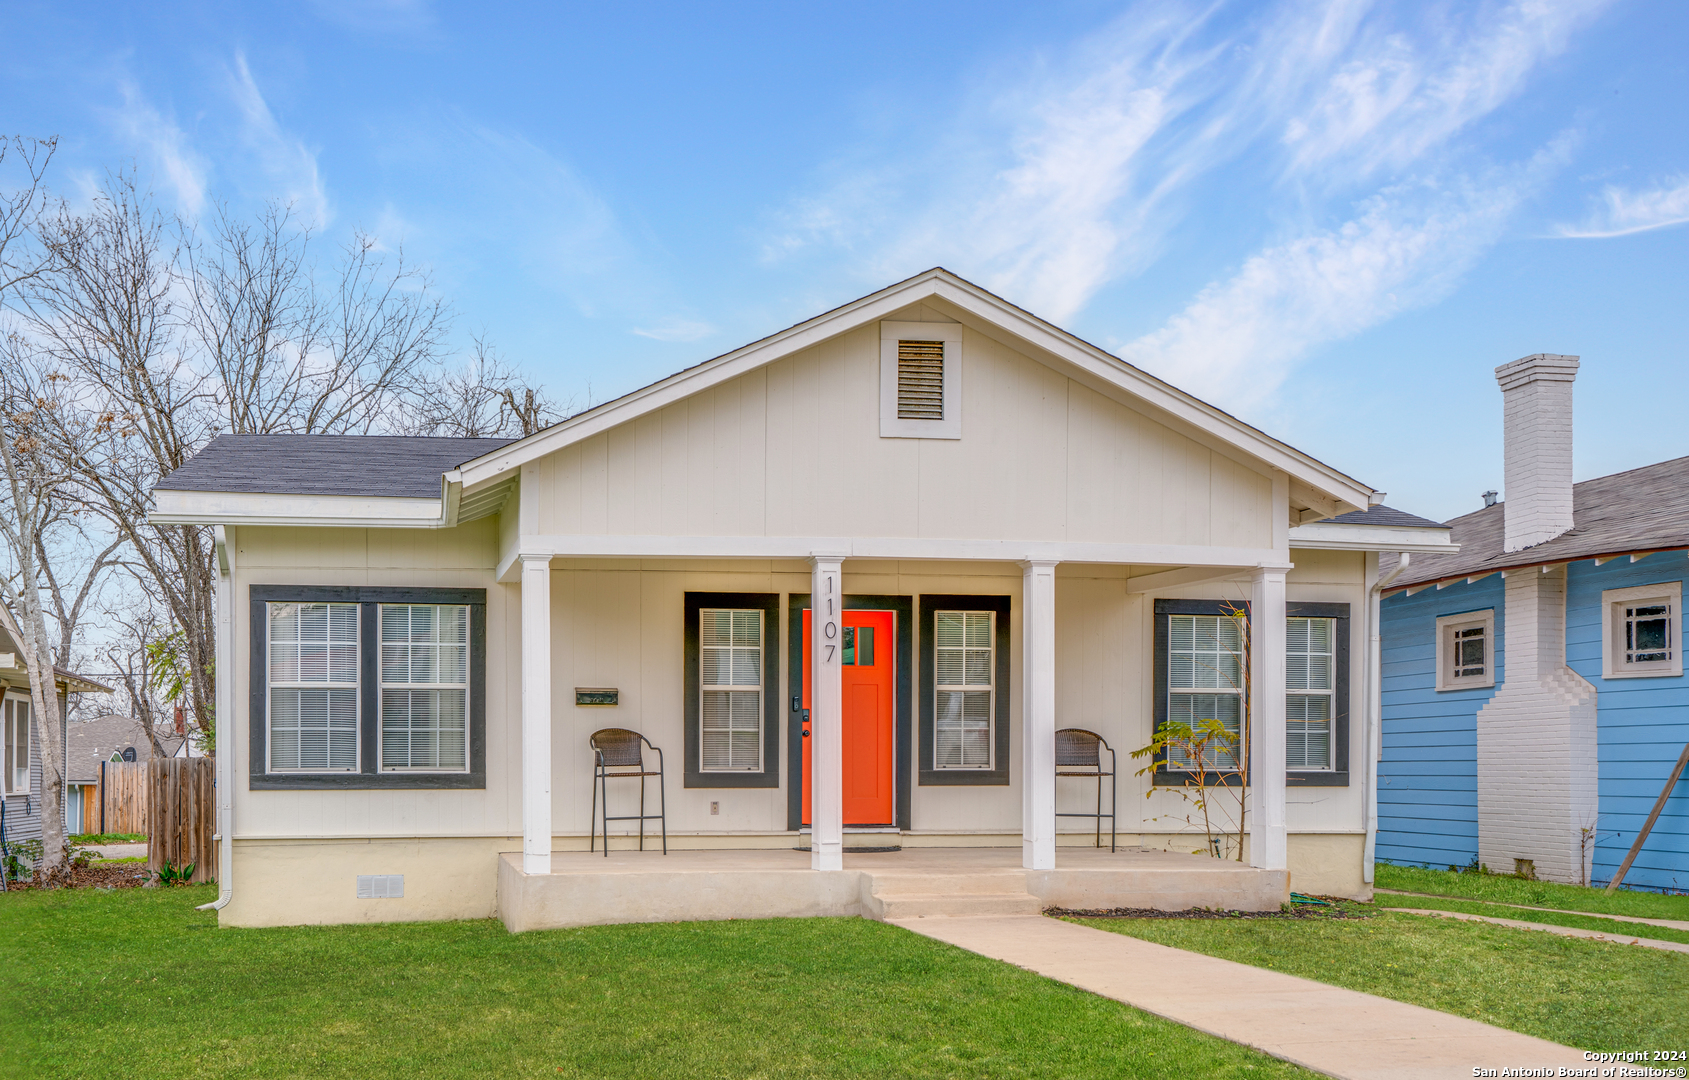 Photo of 1107 Rigsby in San Antonio, TX